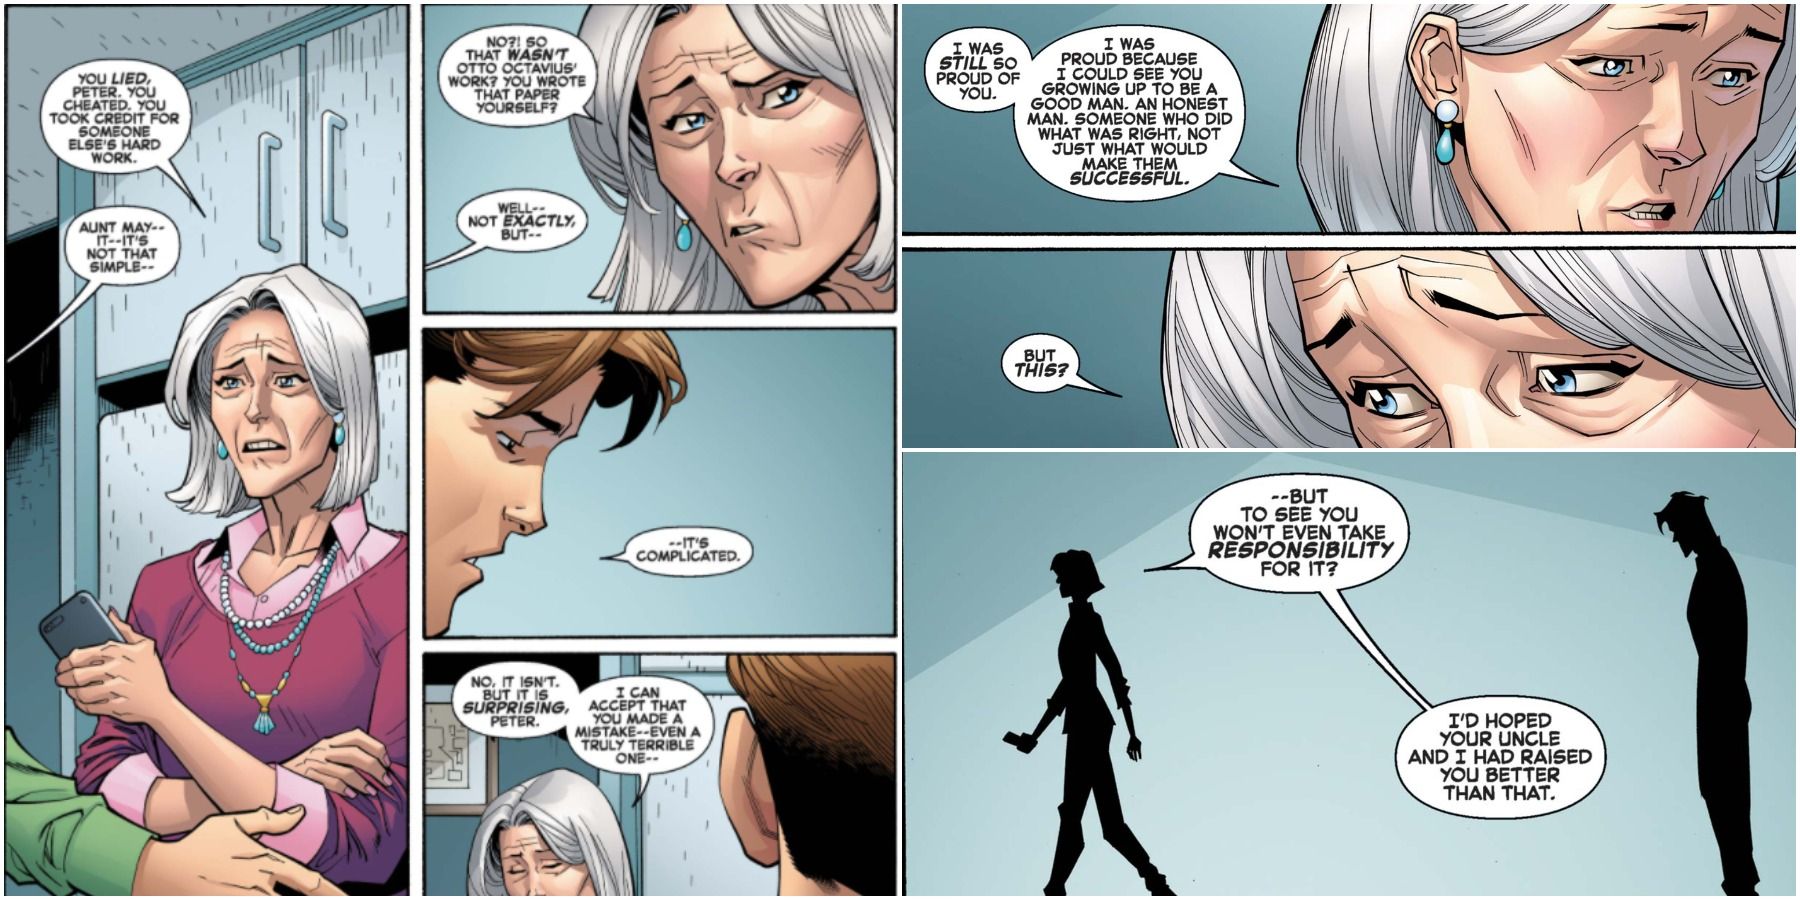 Aunt May expressing disappointment in Peter after hearing of his plagiarized doctorate degree